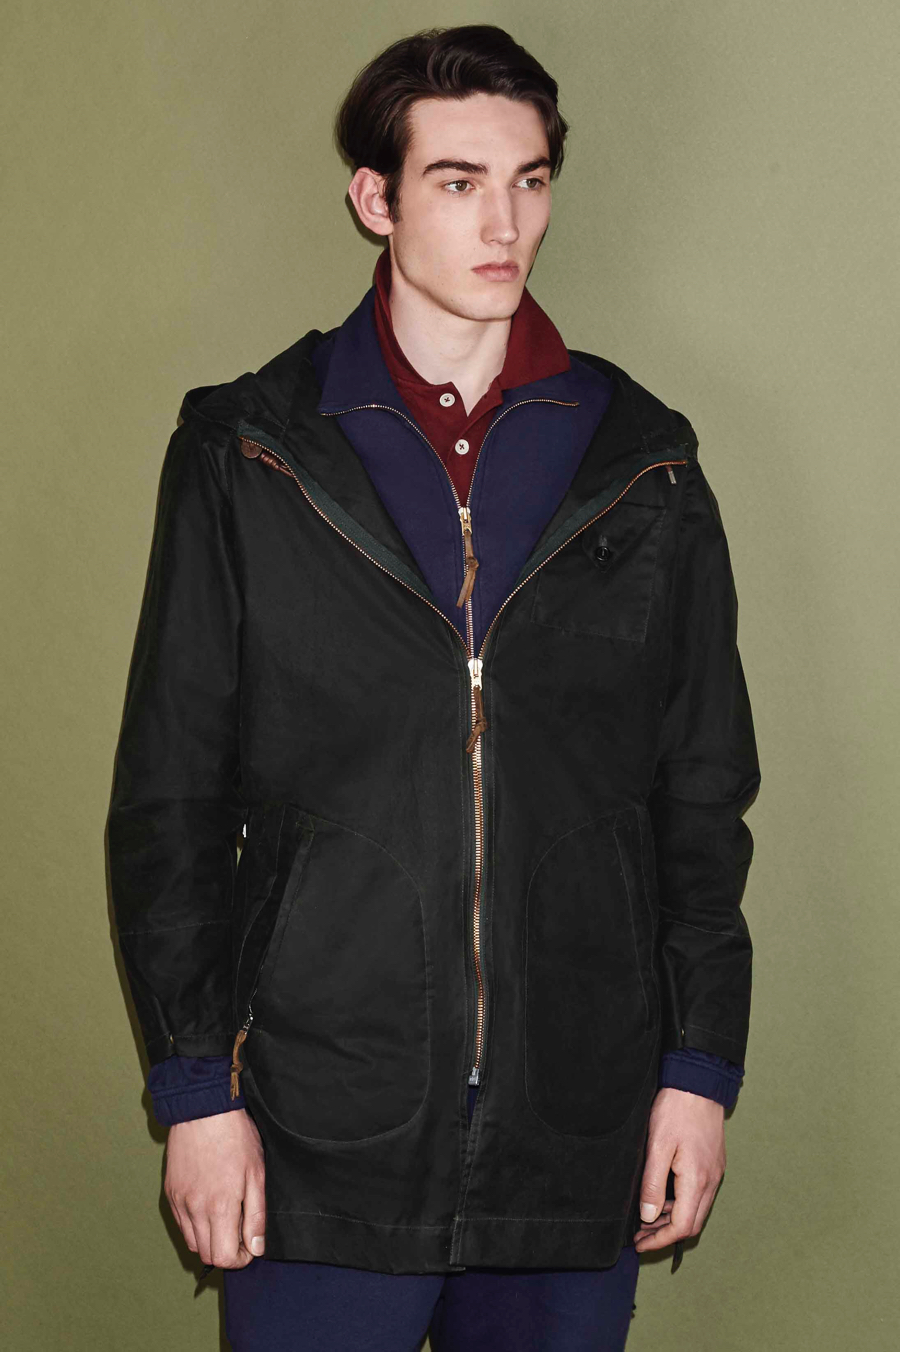 Fred Perry Nigel Cabourn Fall Winter 2015 003